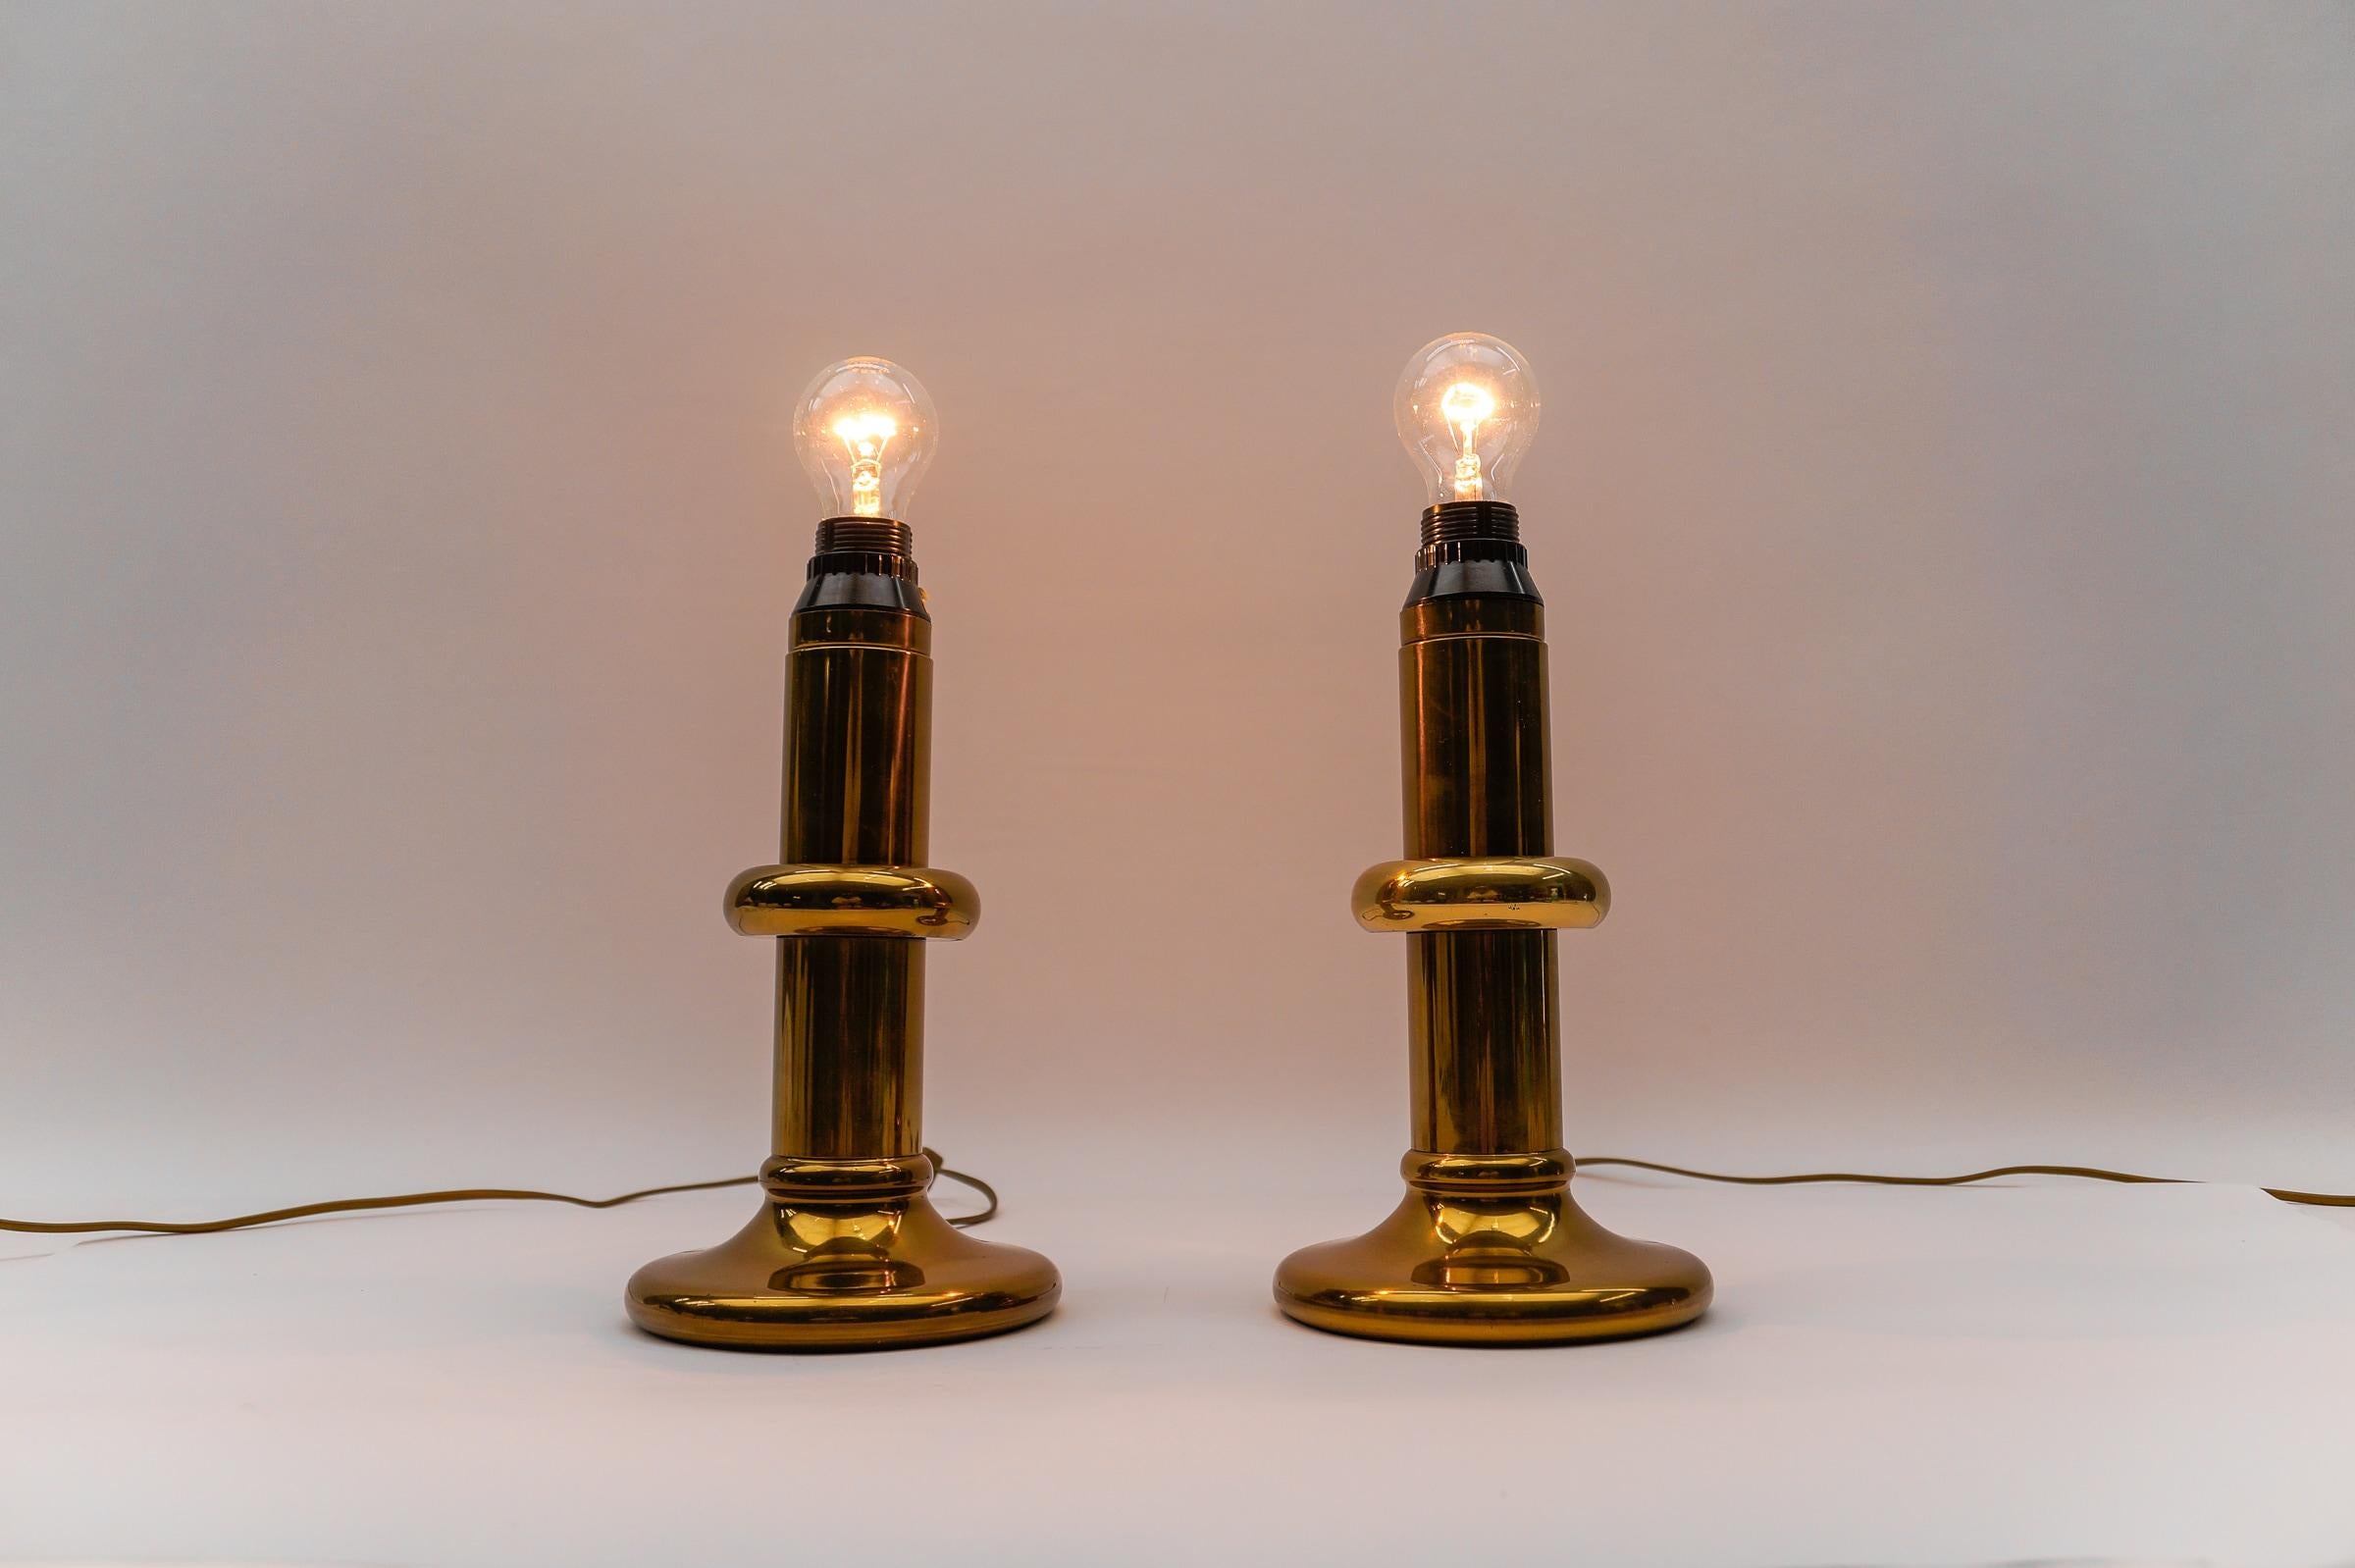 Metal Pair of Mid Century Modern Brass Table Lamp Bases, 1960s For Sale